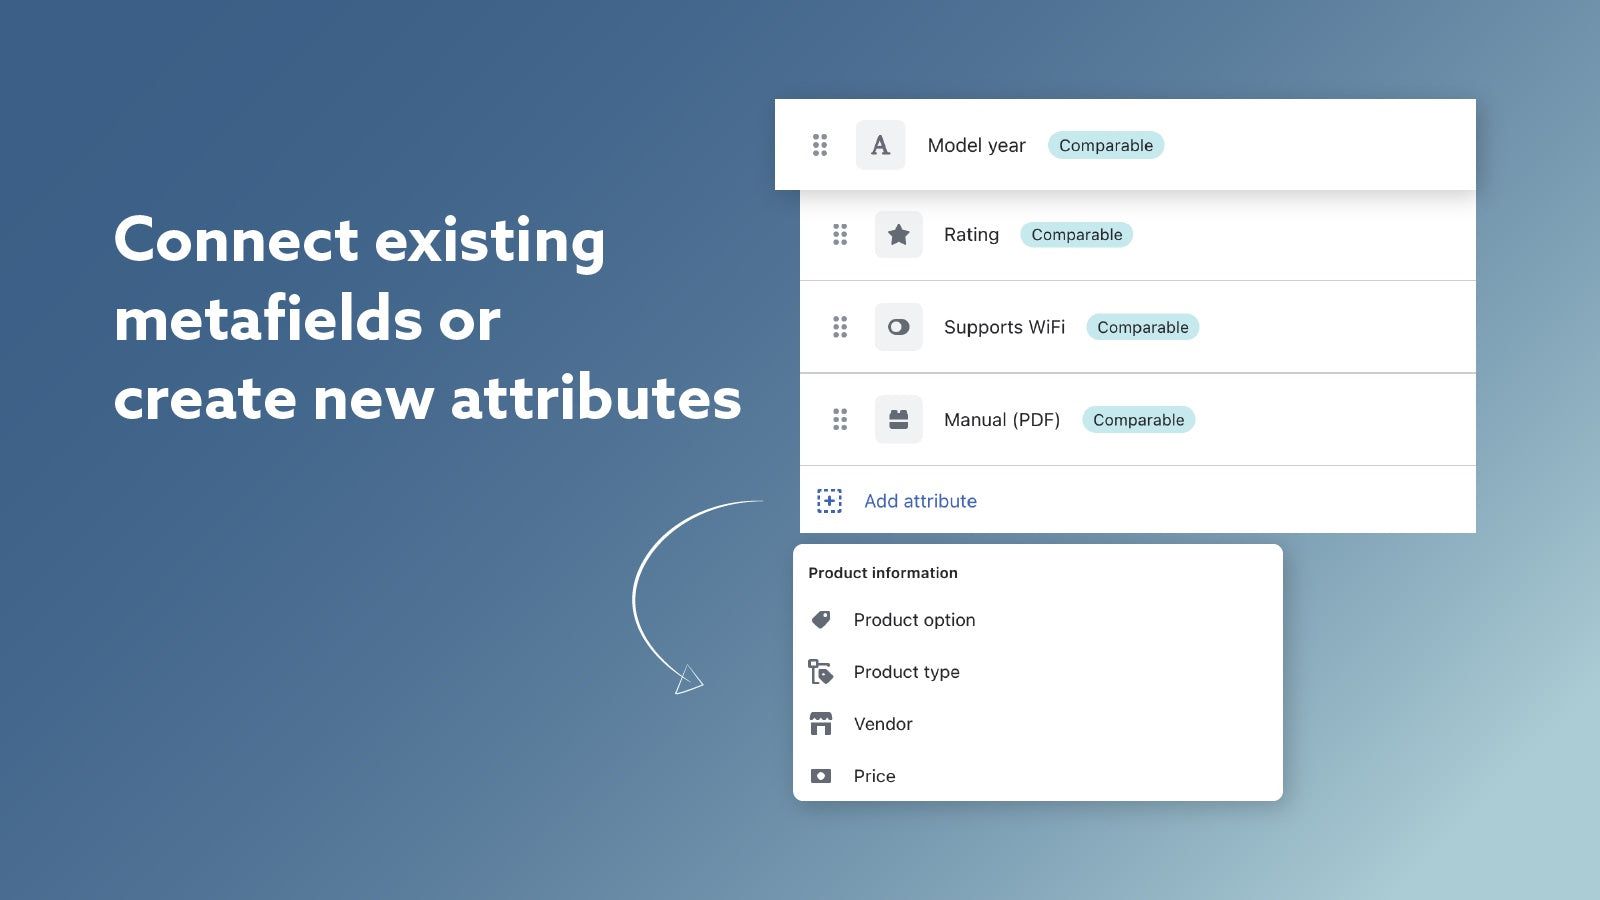 Reuse existing metafields or create new attributes